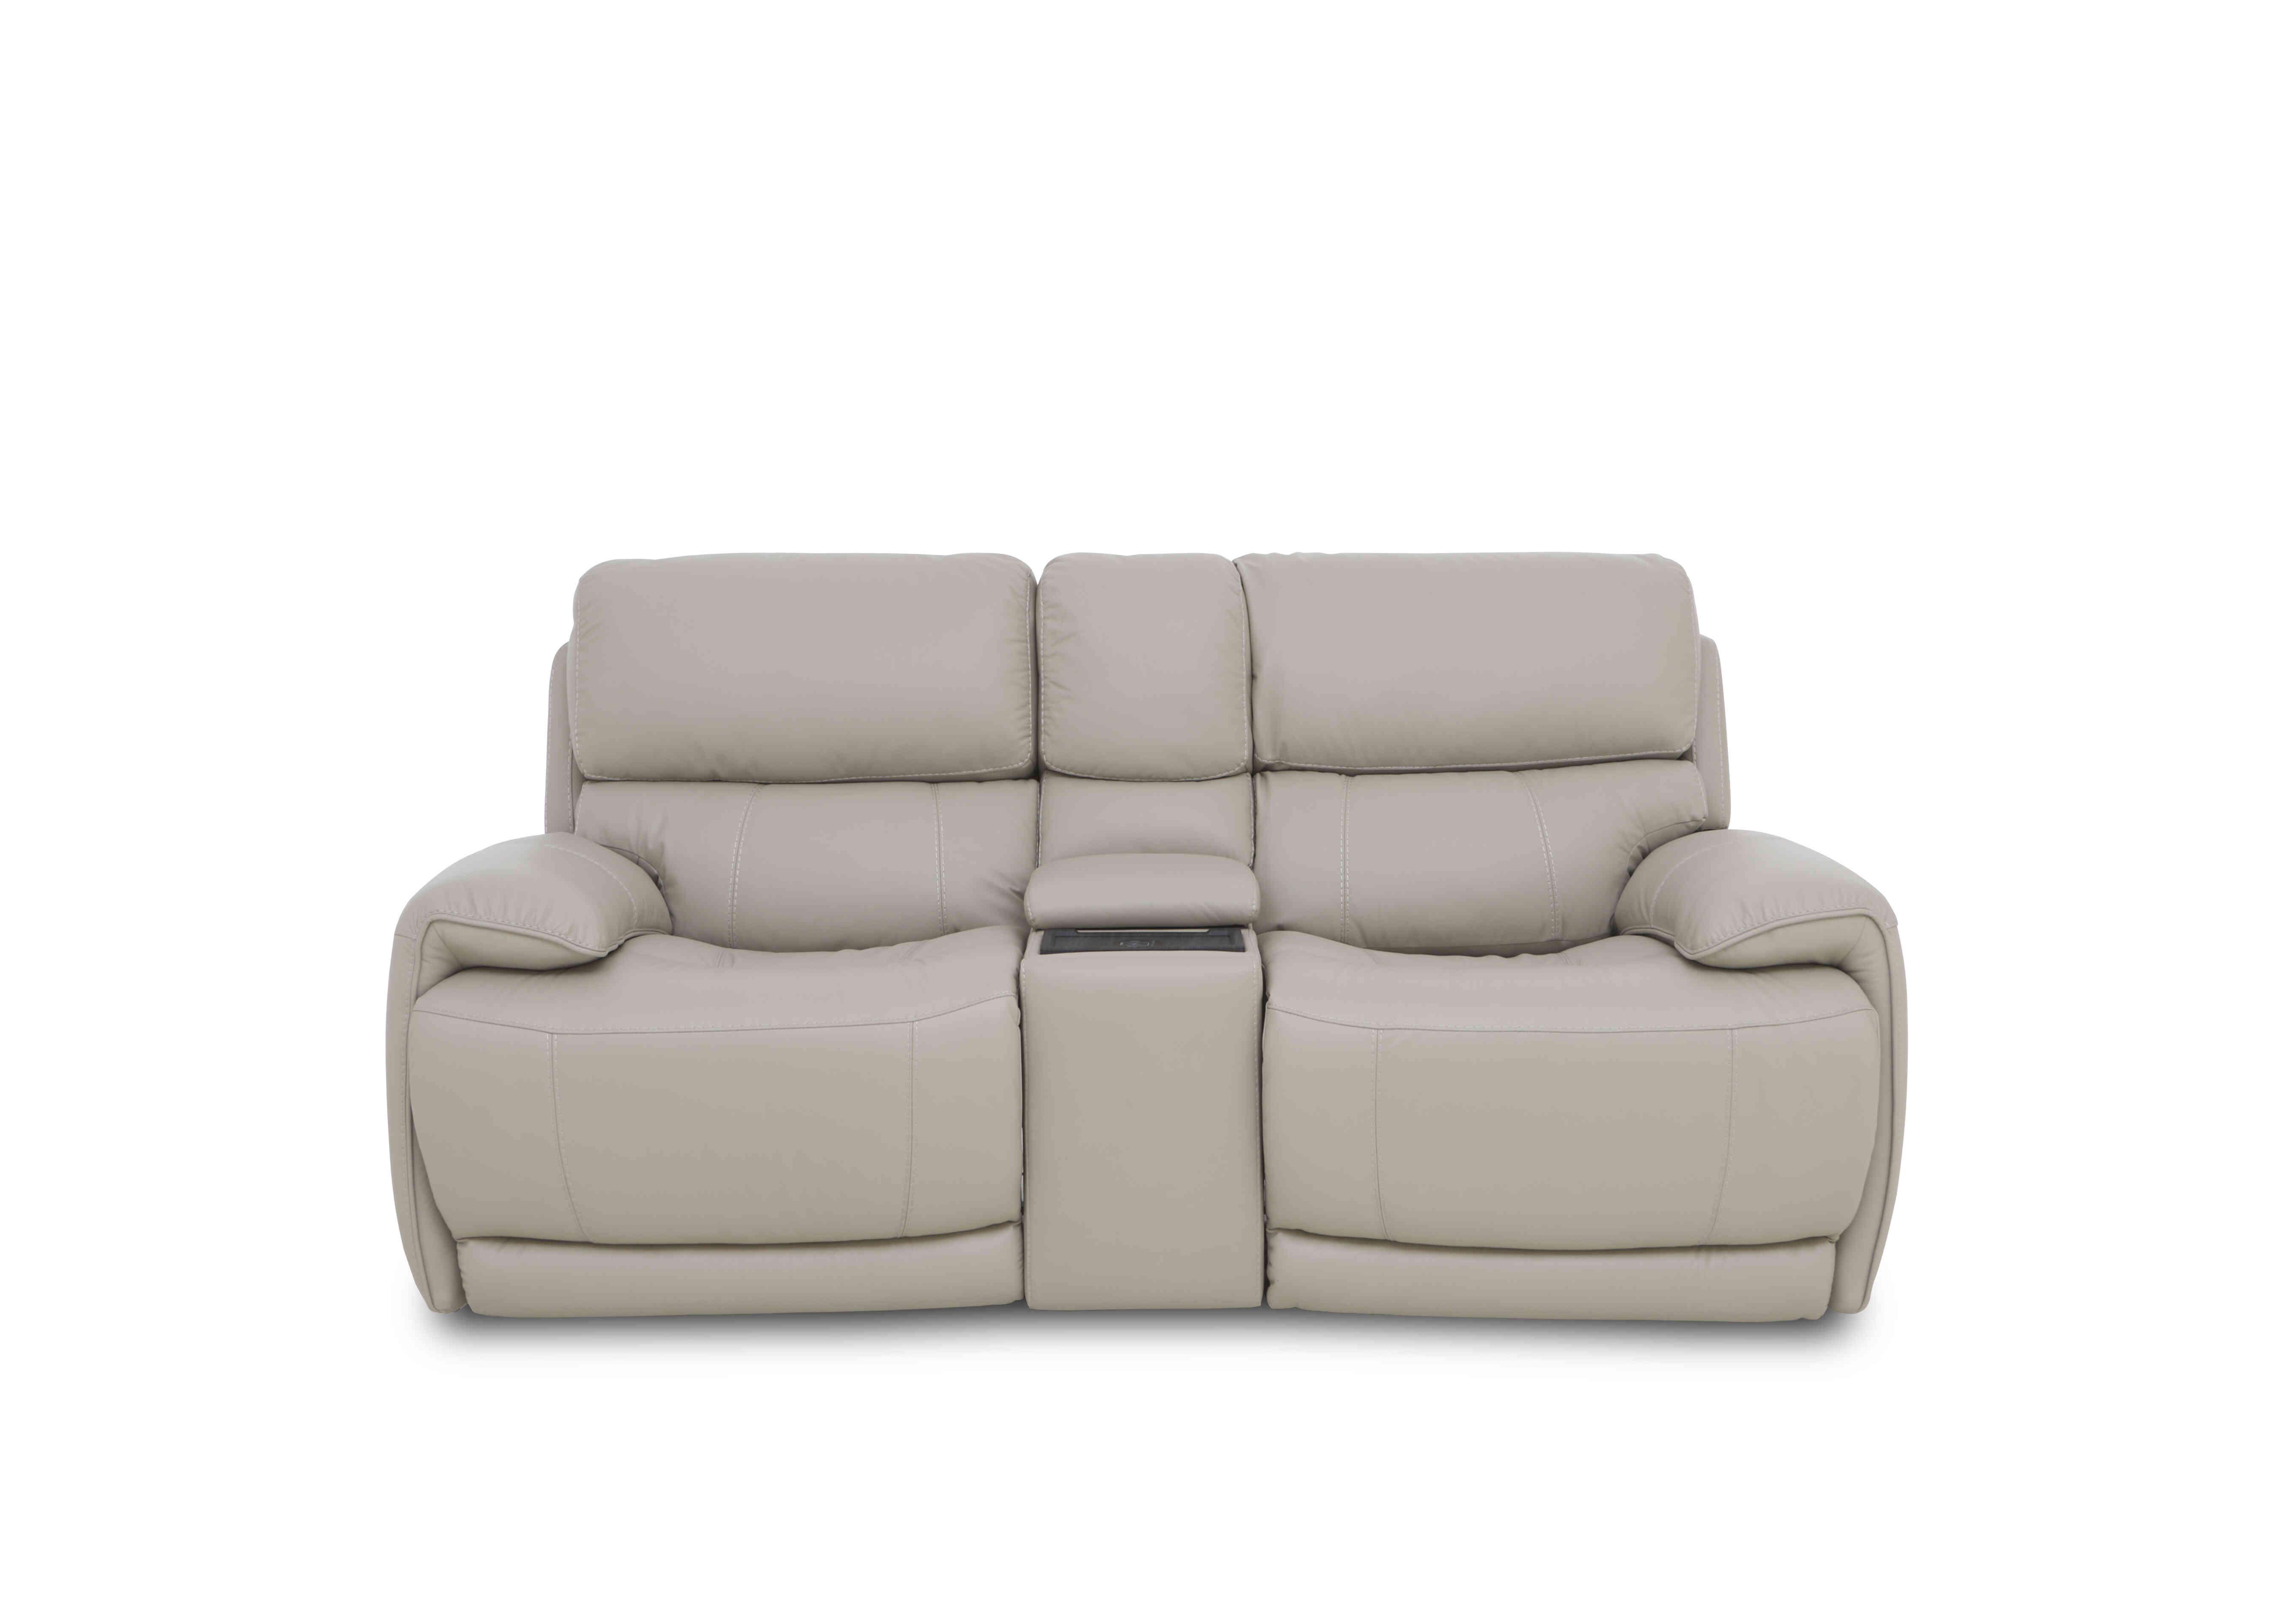 Rocco 2 Seater Leather Power Rocker Sofa with Cup Holders and Power Headrests in Bv-041e Dapple Grey on Furniture Village